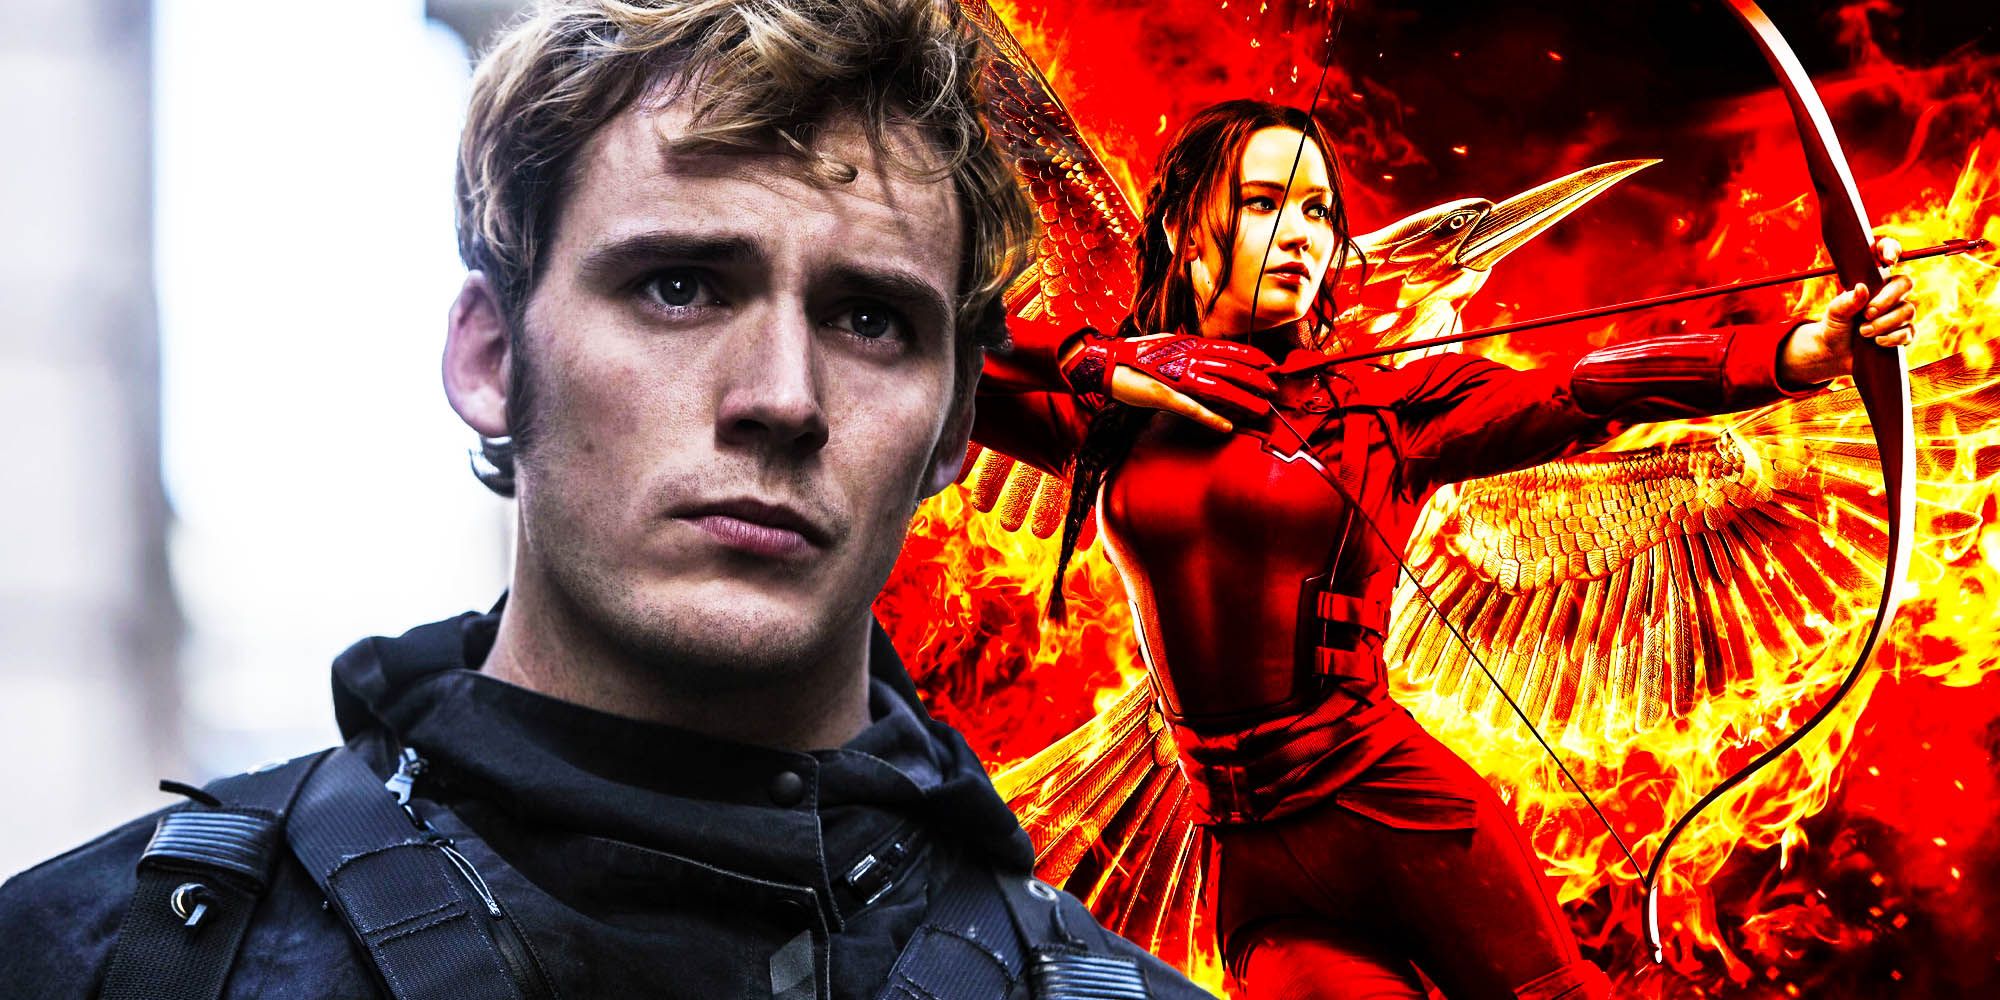 A blended image features Finnick Odair in Hunger Games: Mockingjay and Katniss Everdeen in Hunger Games franchise promotional artwork.